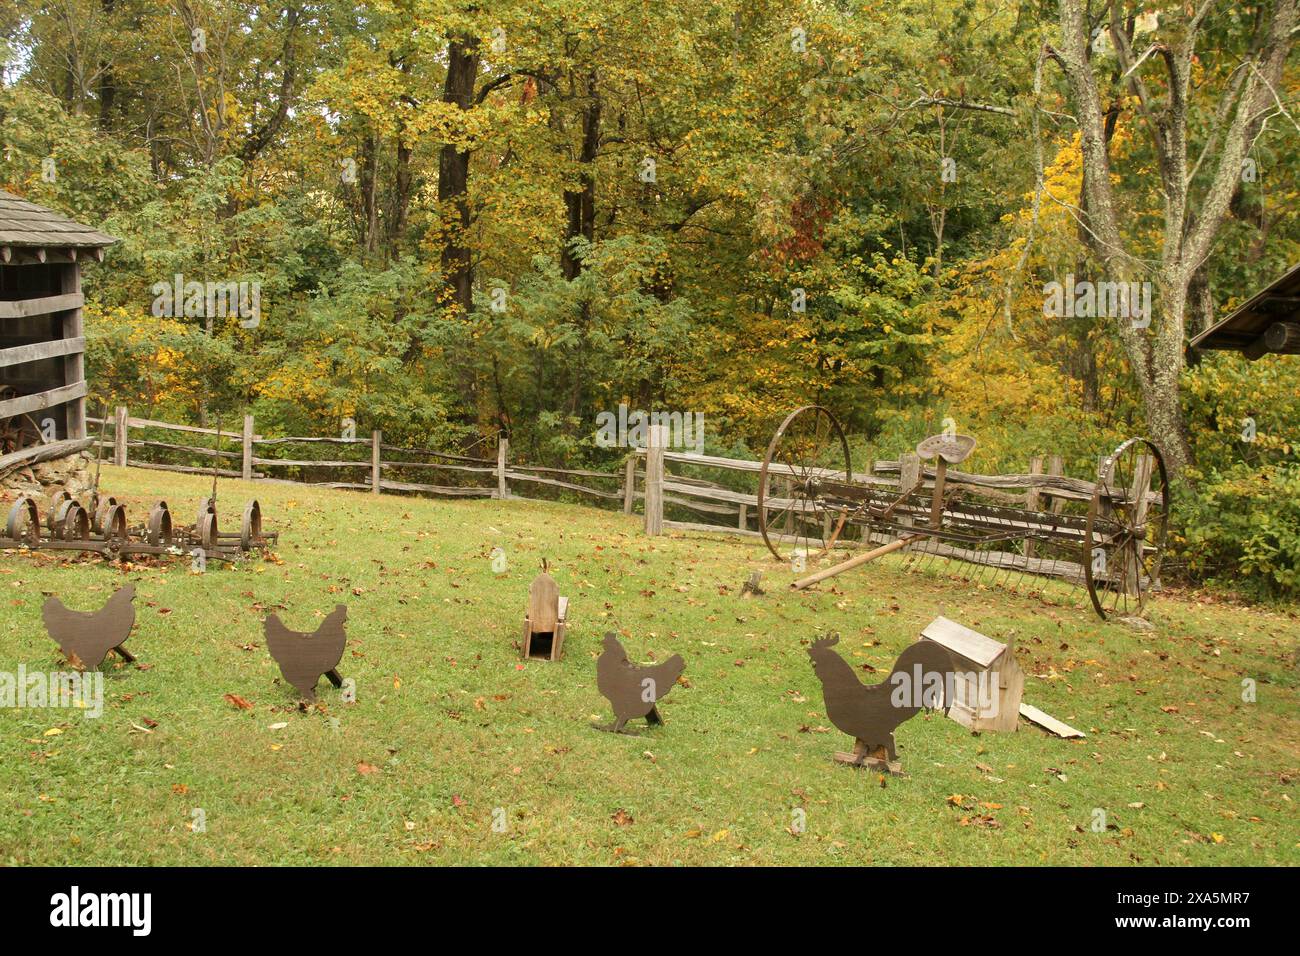 Old farm equipment and metallic chicken silhouettes displayed at the historical Johnson Farm in Virginia's Blue Ridge Parkway, USA Stock Photo